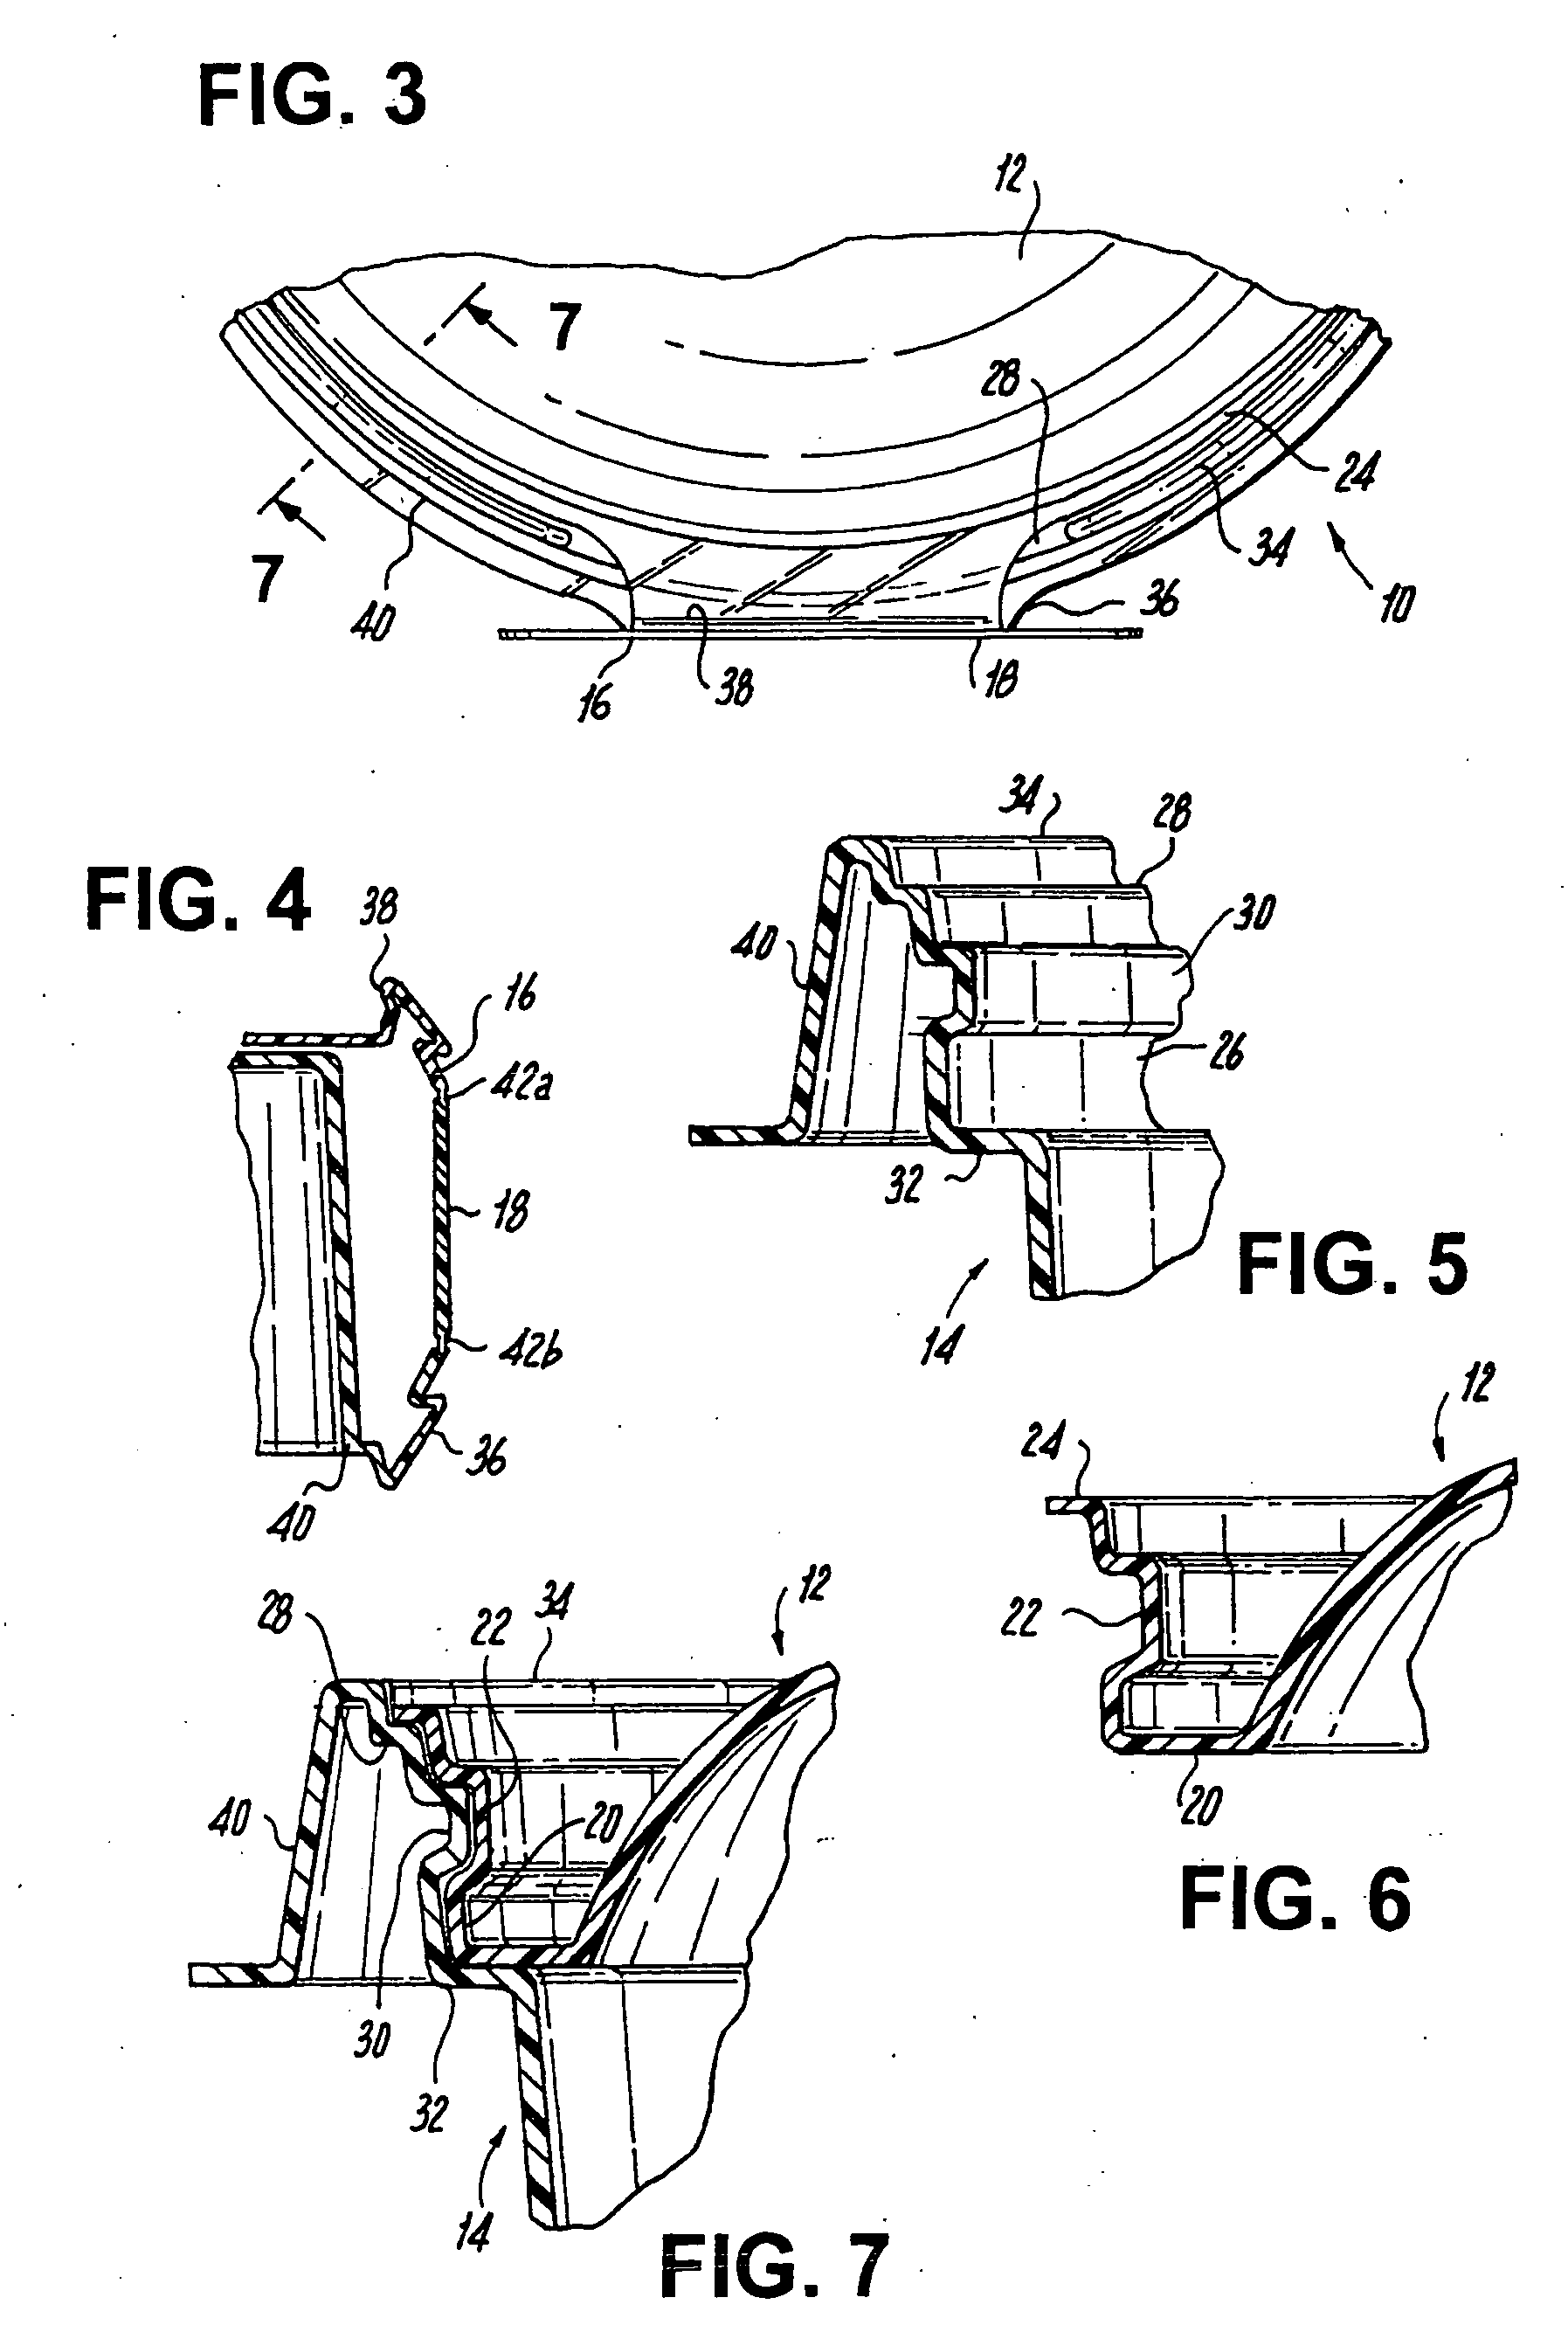 Tamper-resistant container with tamper-evident feature and method of forming the same